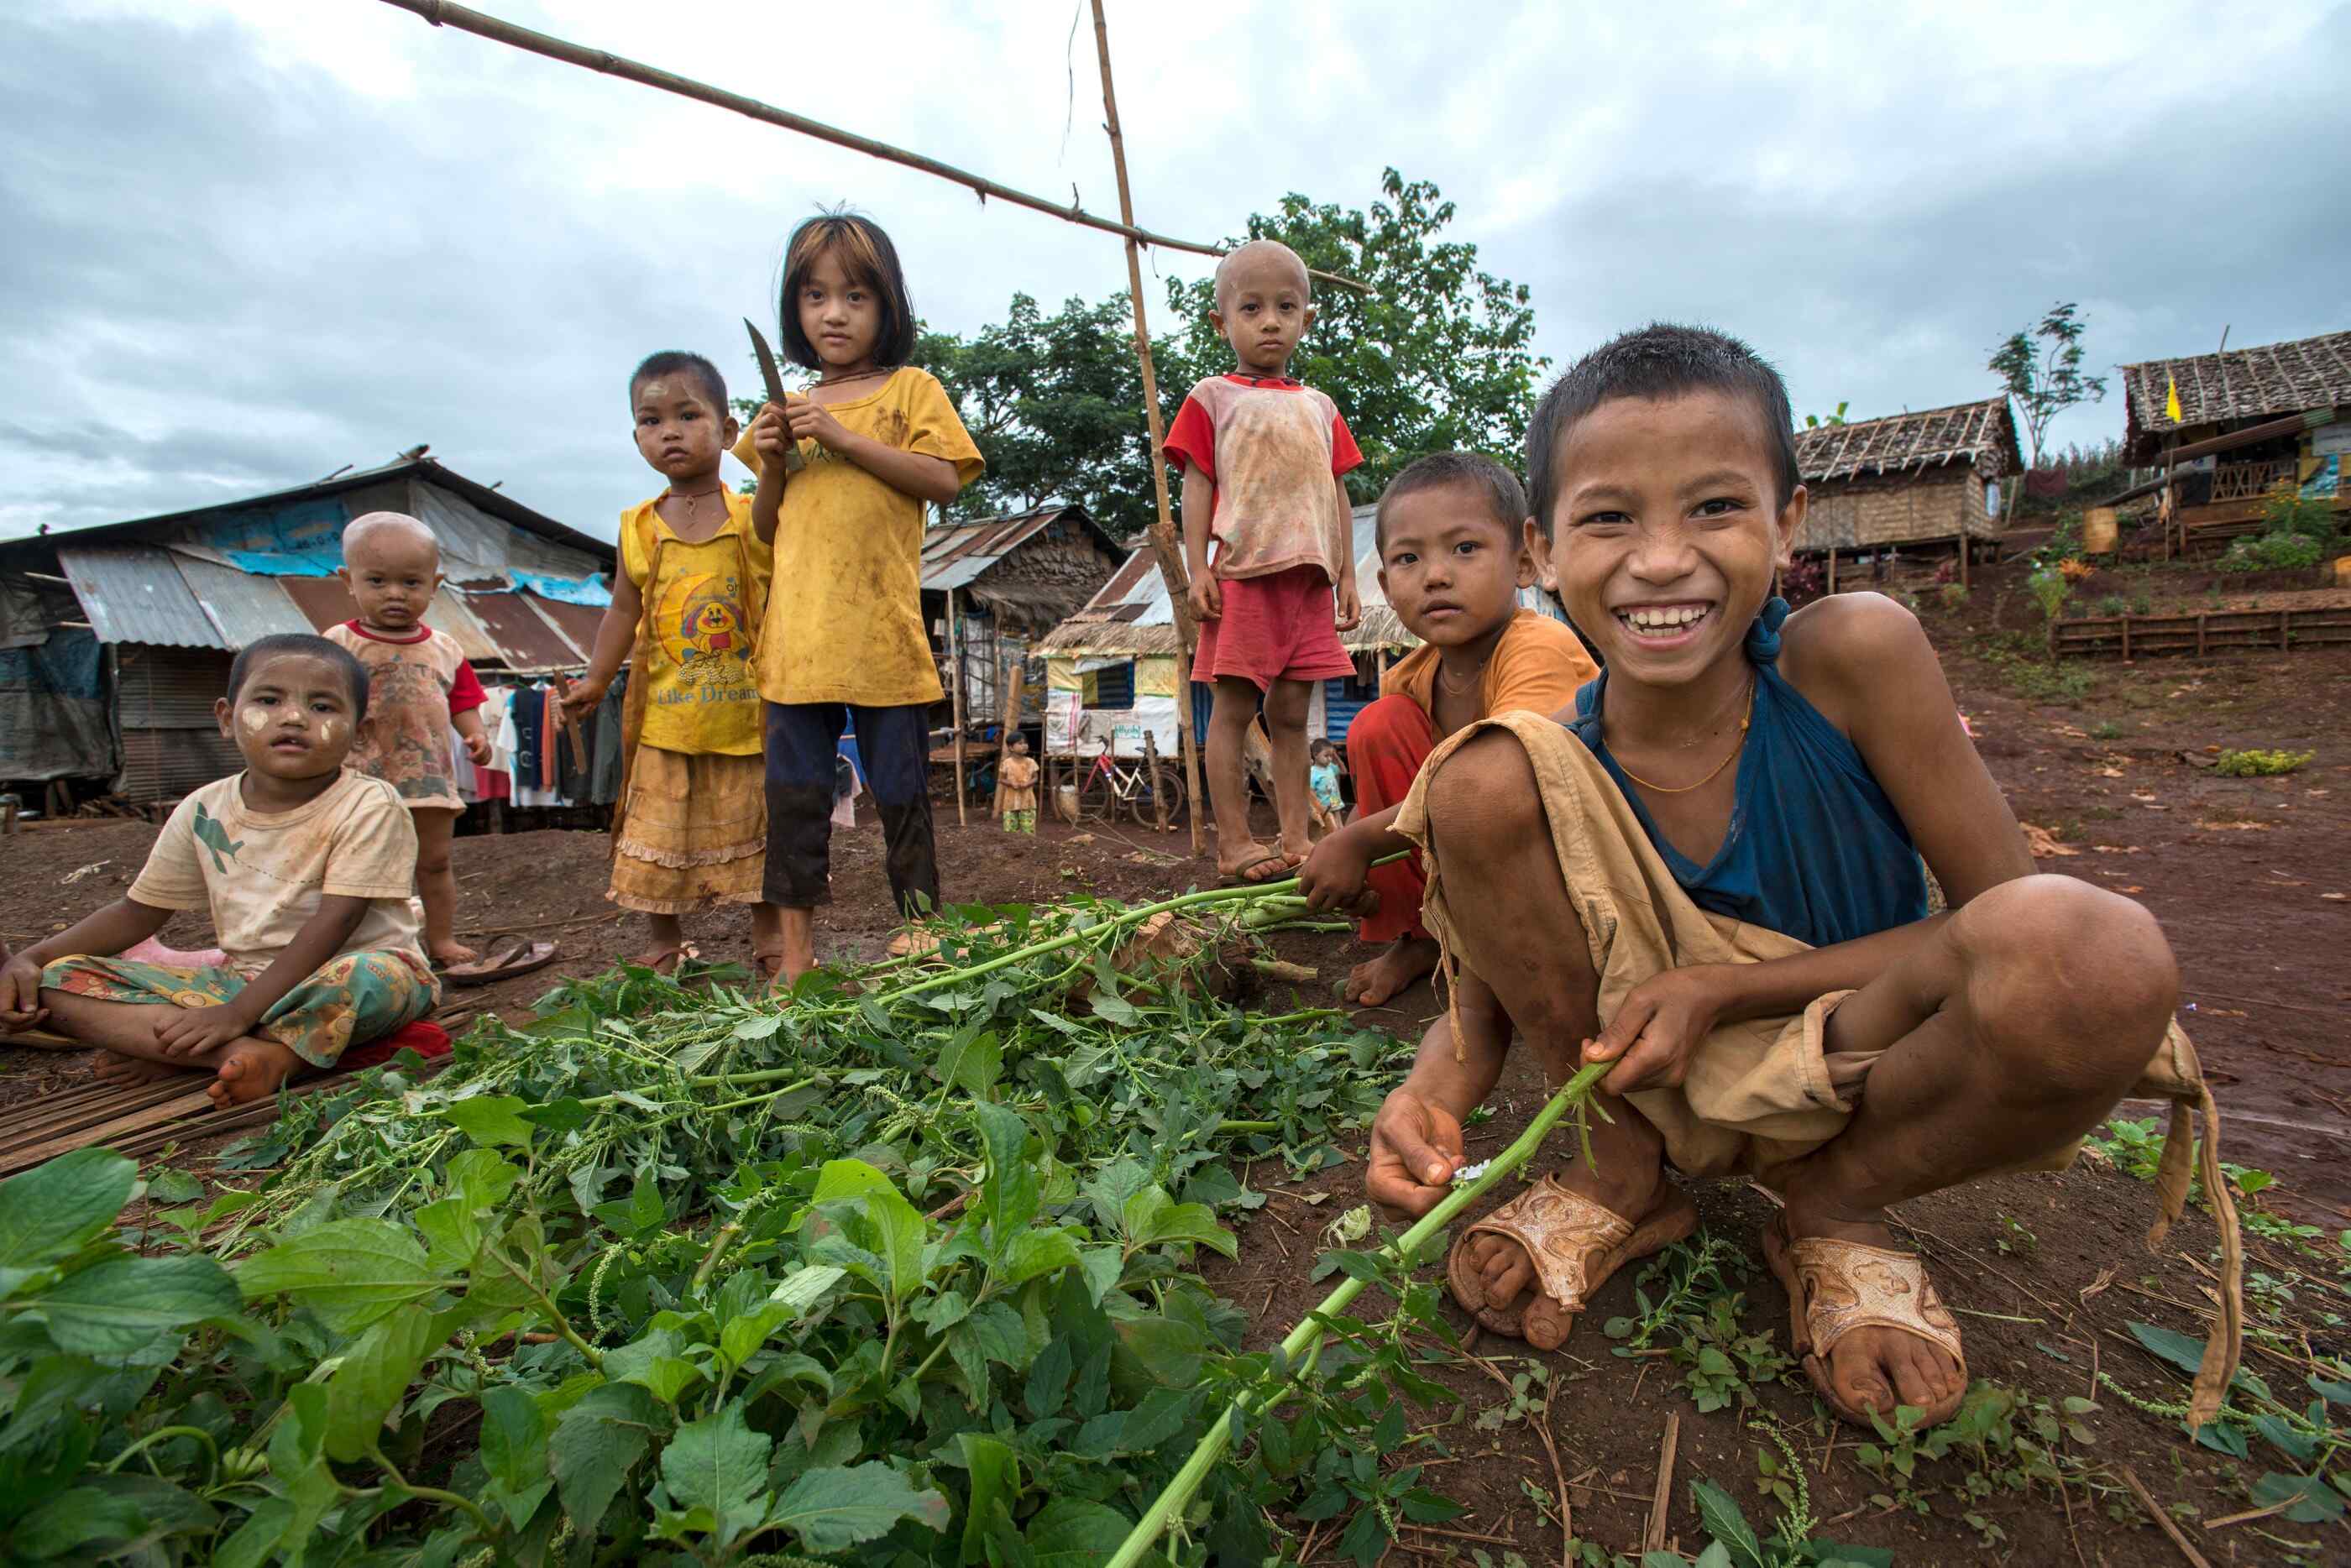 Young children outside surround a small garden in a settlement for migrant workers.